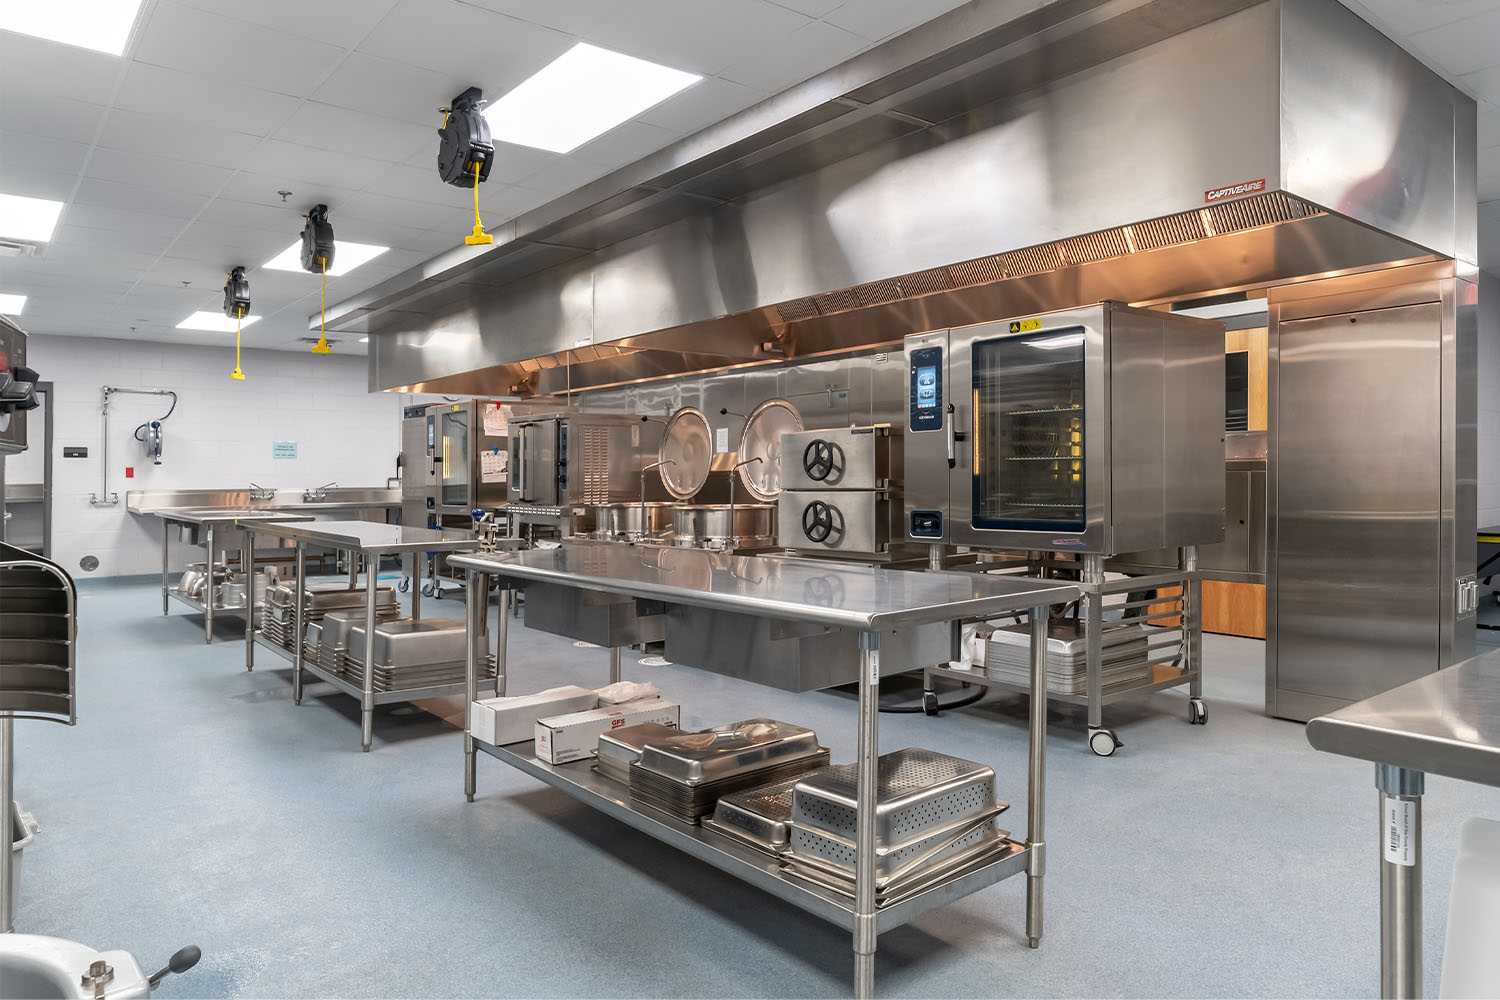 Kitchen with stainless steel equipment, food prep tables, ovens, exhaust hoods and serving trays